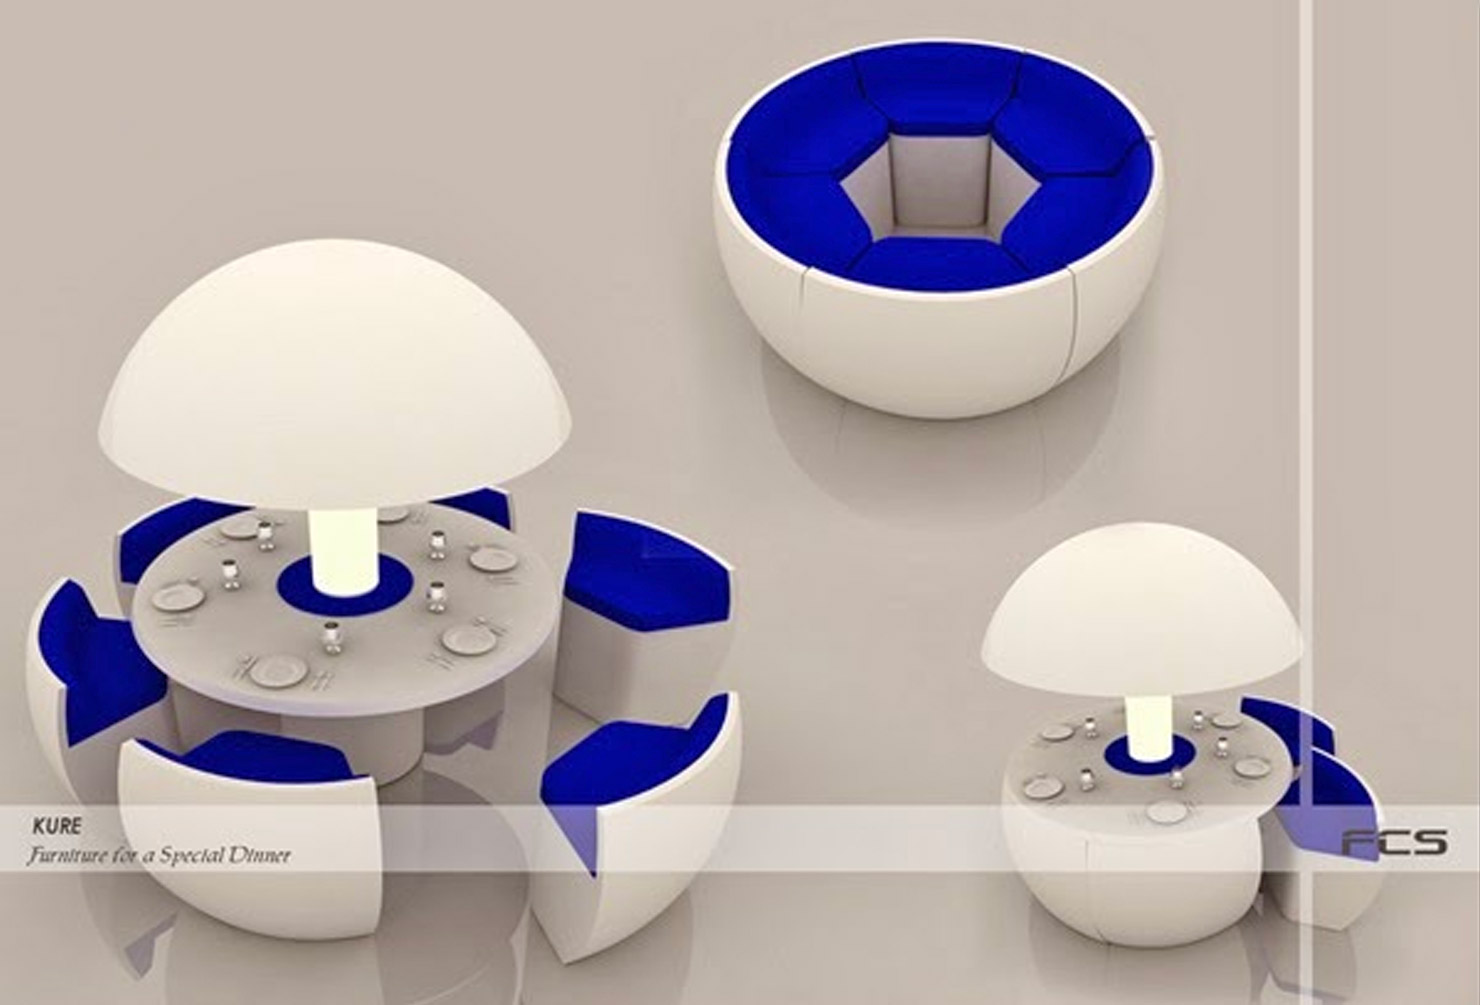 White colored Kure Futuristic Dining Table Turns Into an Egg with blue seat covers